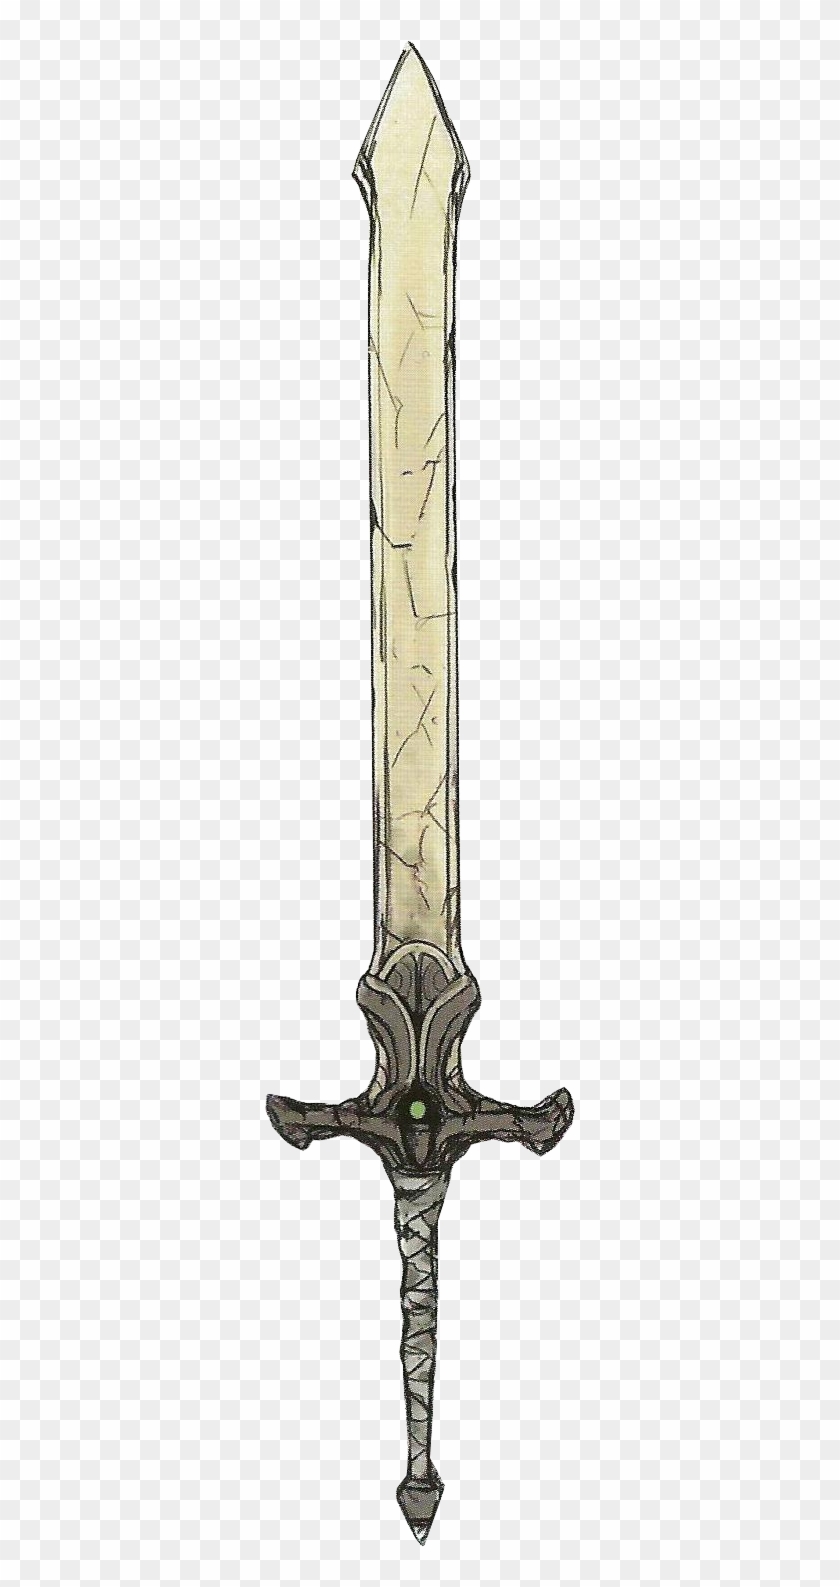 Who Has The Coolest Sword In Smash Bros - Fire Emblem Black Knight Sword Clipart #99412